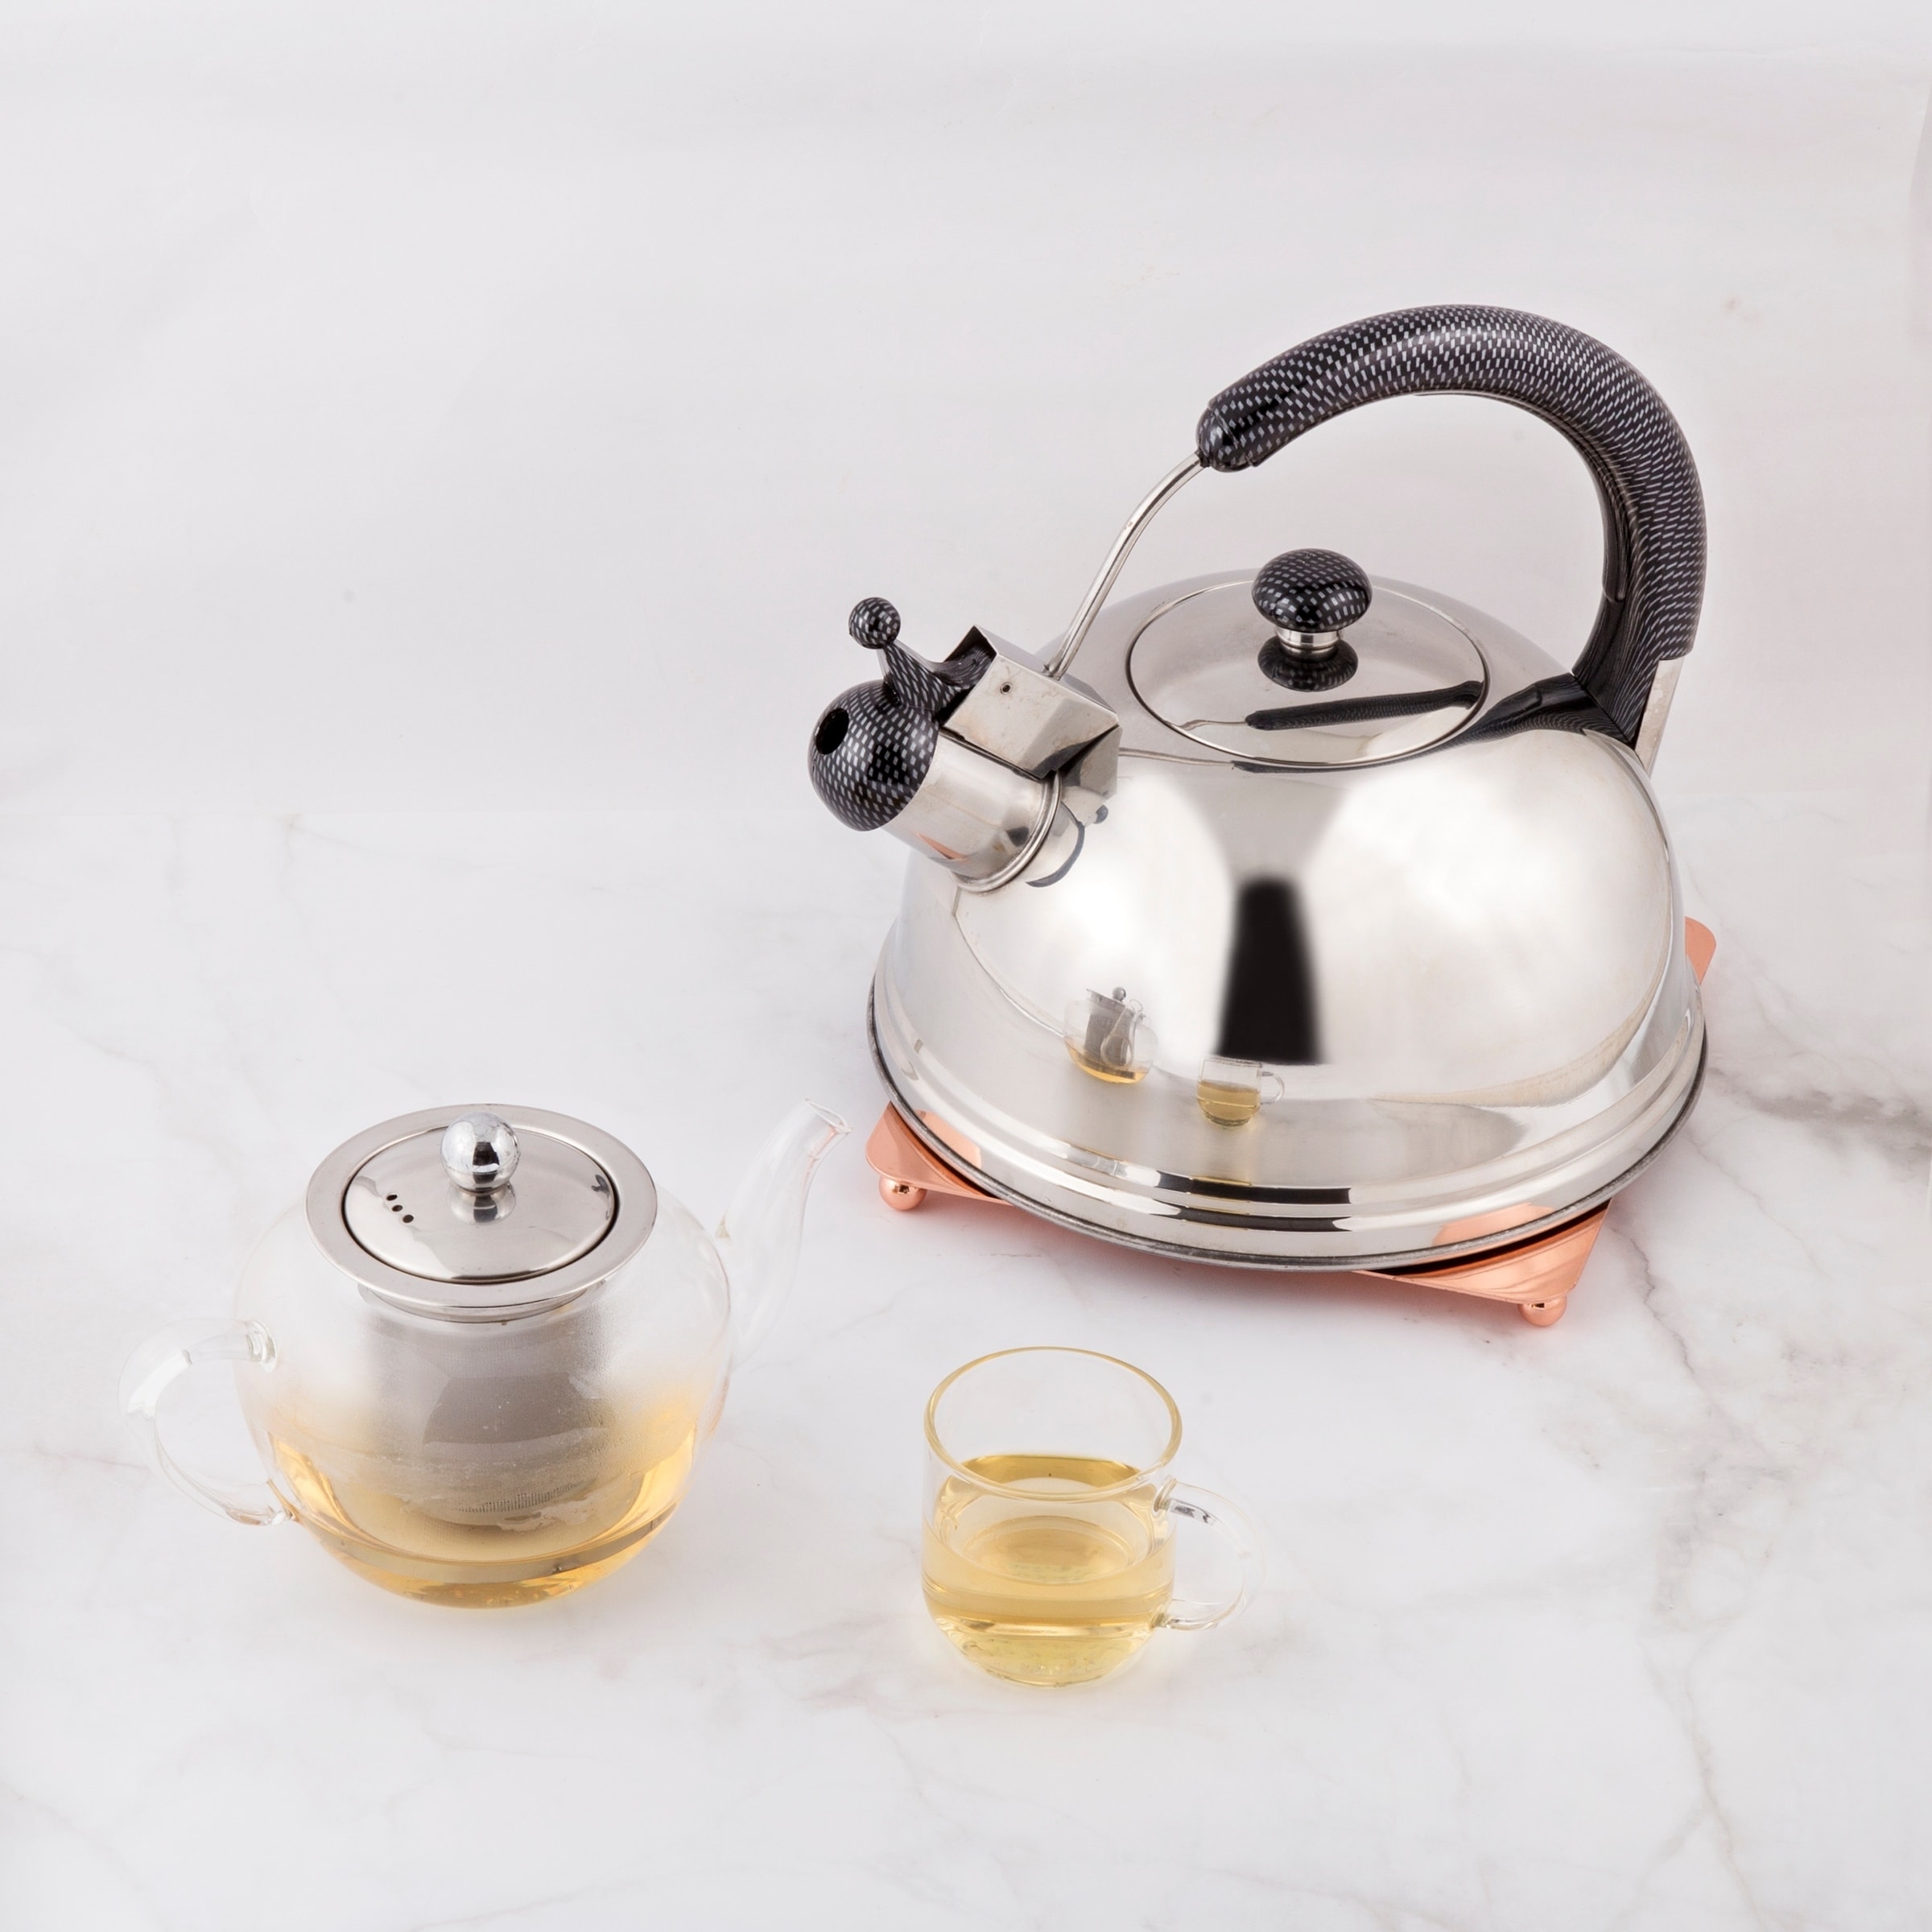  Tea kettle, Orange Whistling Tea Kettle for Stovetop 2.3 Quart  Food Grade Stainless Steel Teapot with Cool Touch Ergonomic Handle: Home &  Kitchen